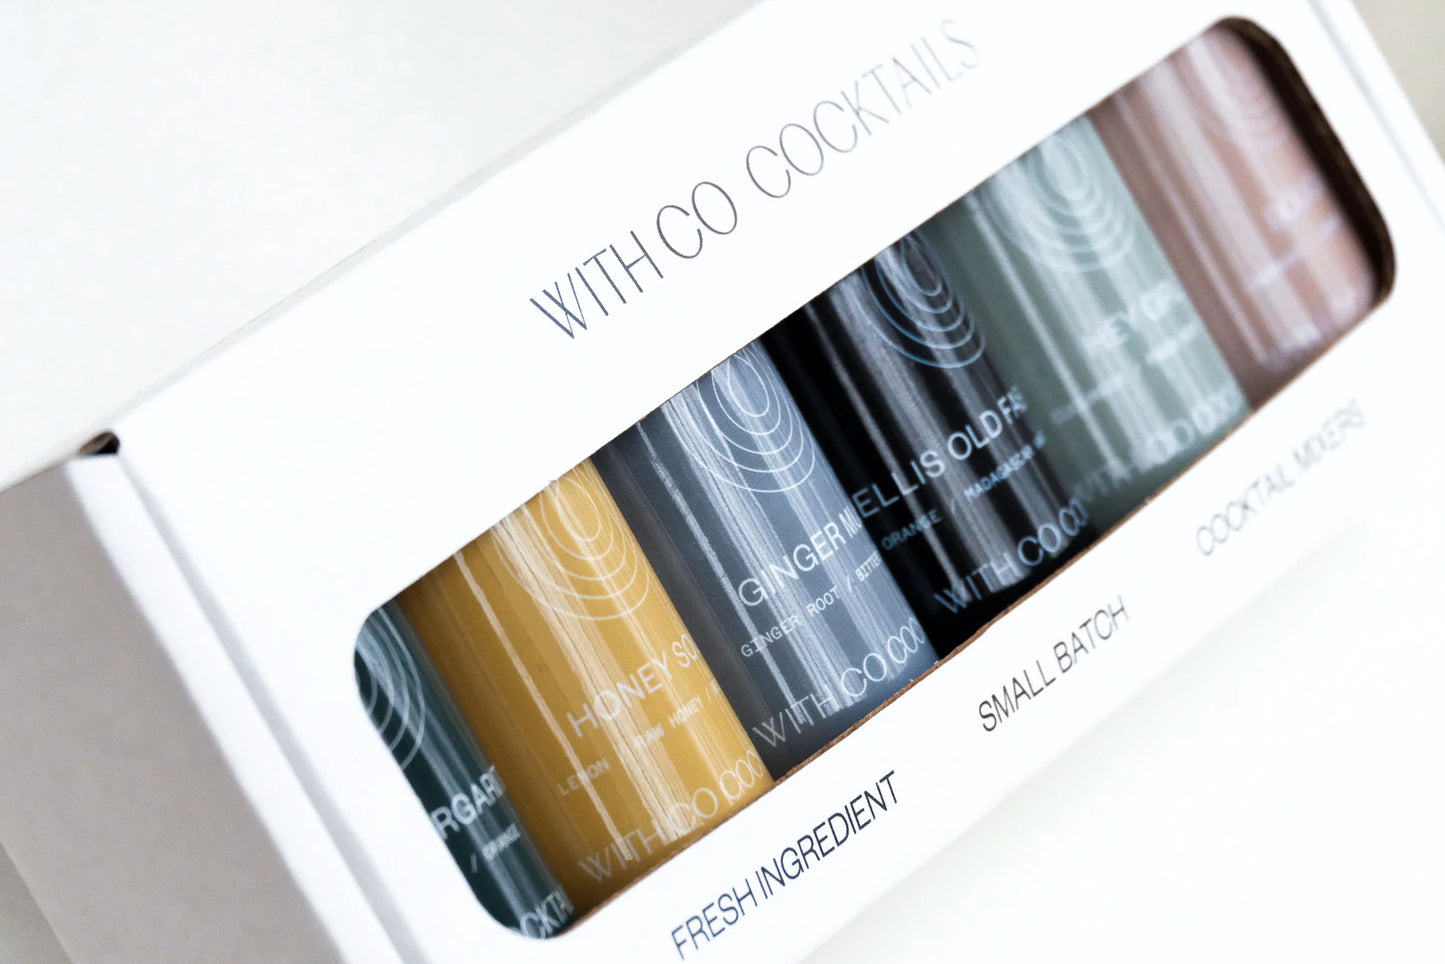 WITHCO Cocktails: Small Batch Sampler Pack